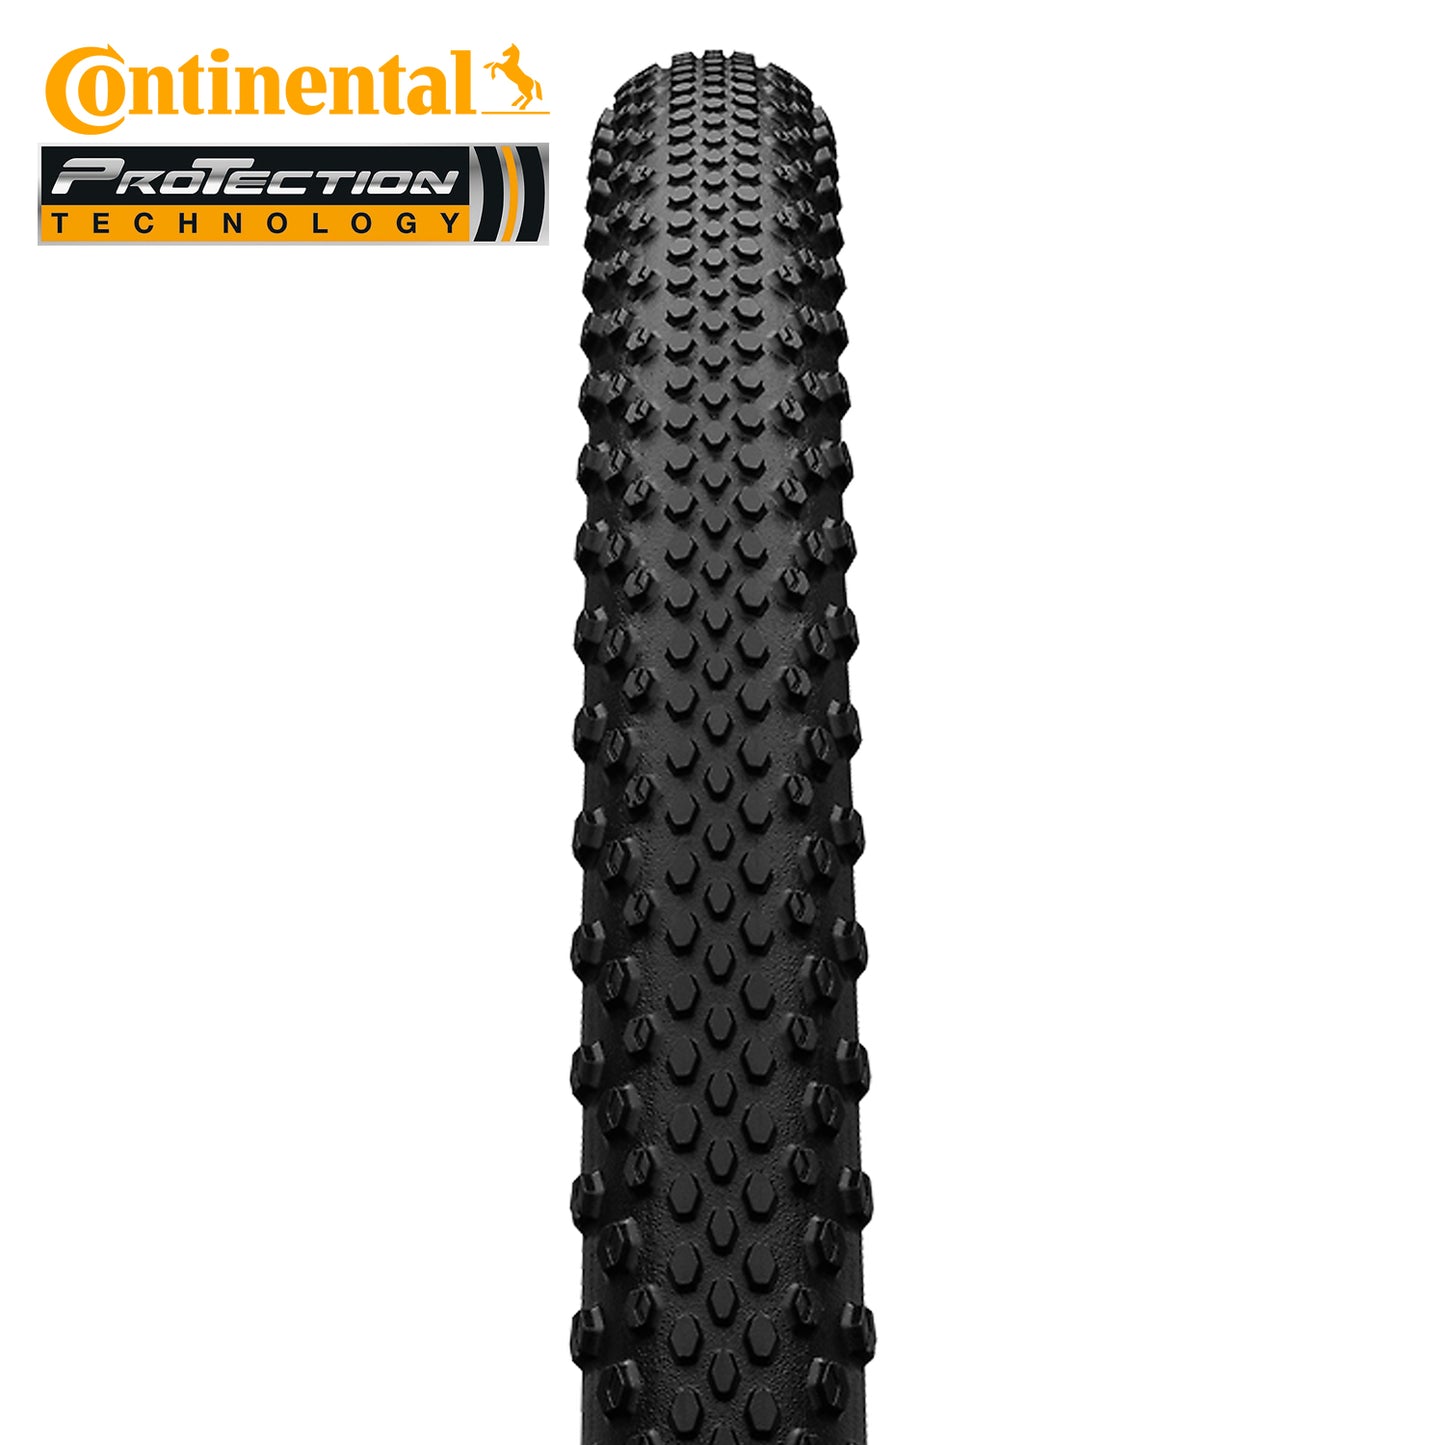 Continental Terra Trail Gravel Tire Tubeless Ready ProTection 700c - Tan Wall